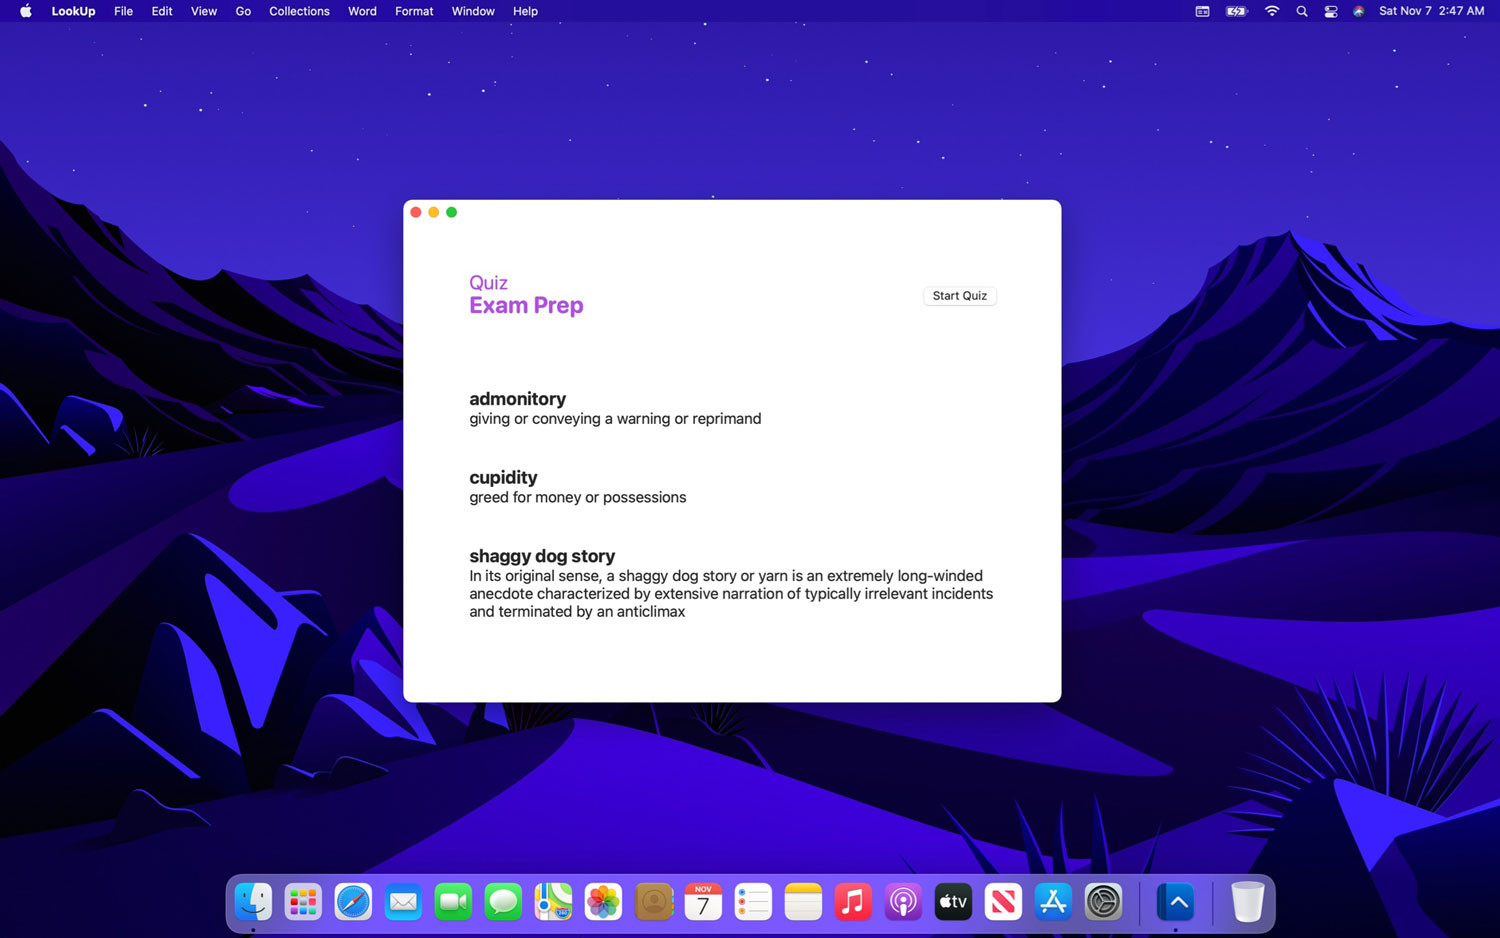 Quizzes on macOS